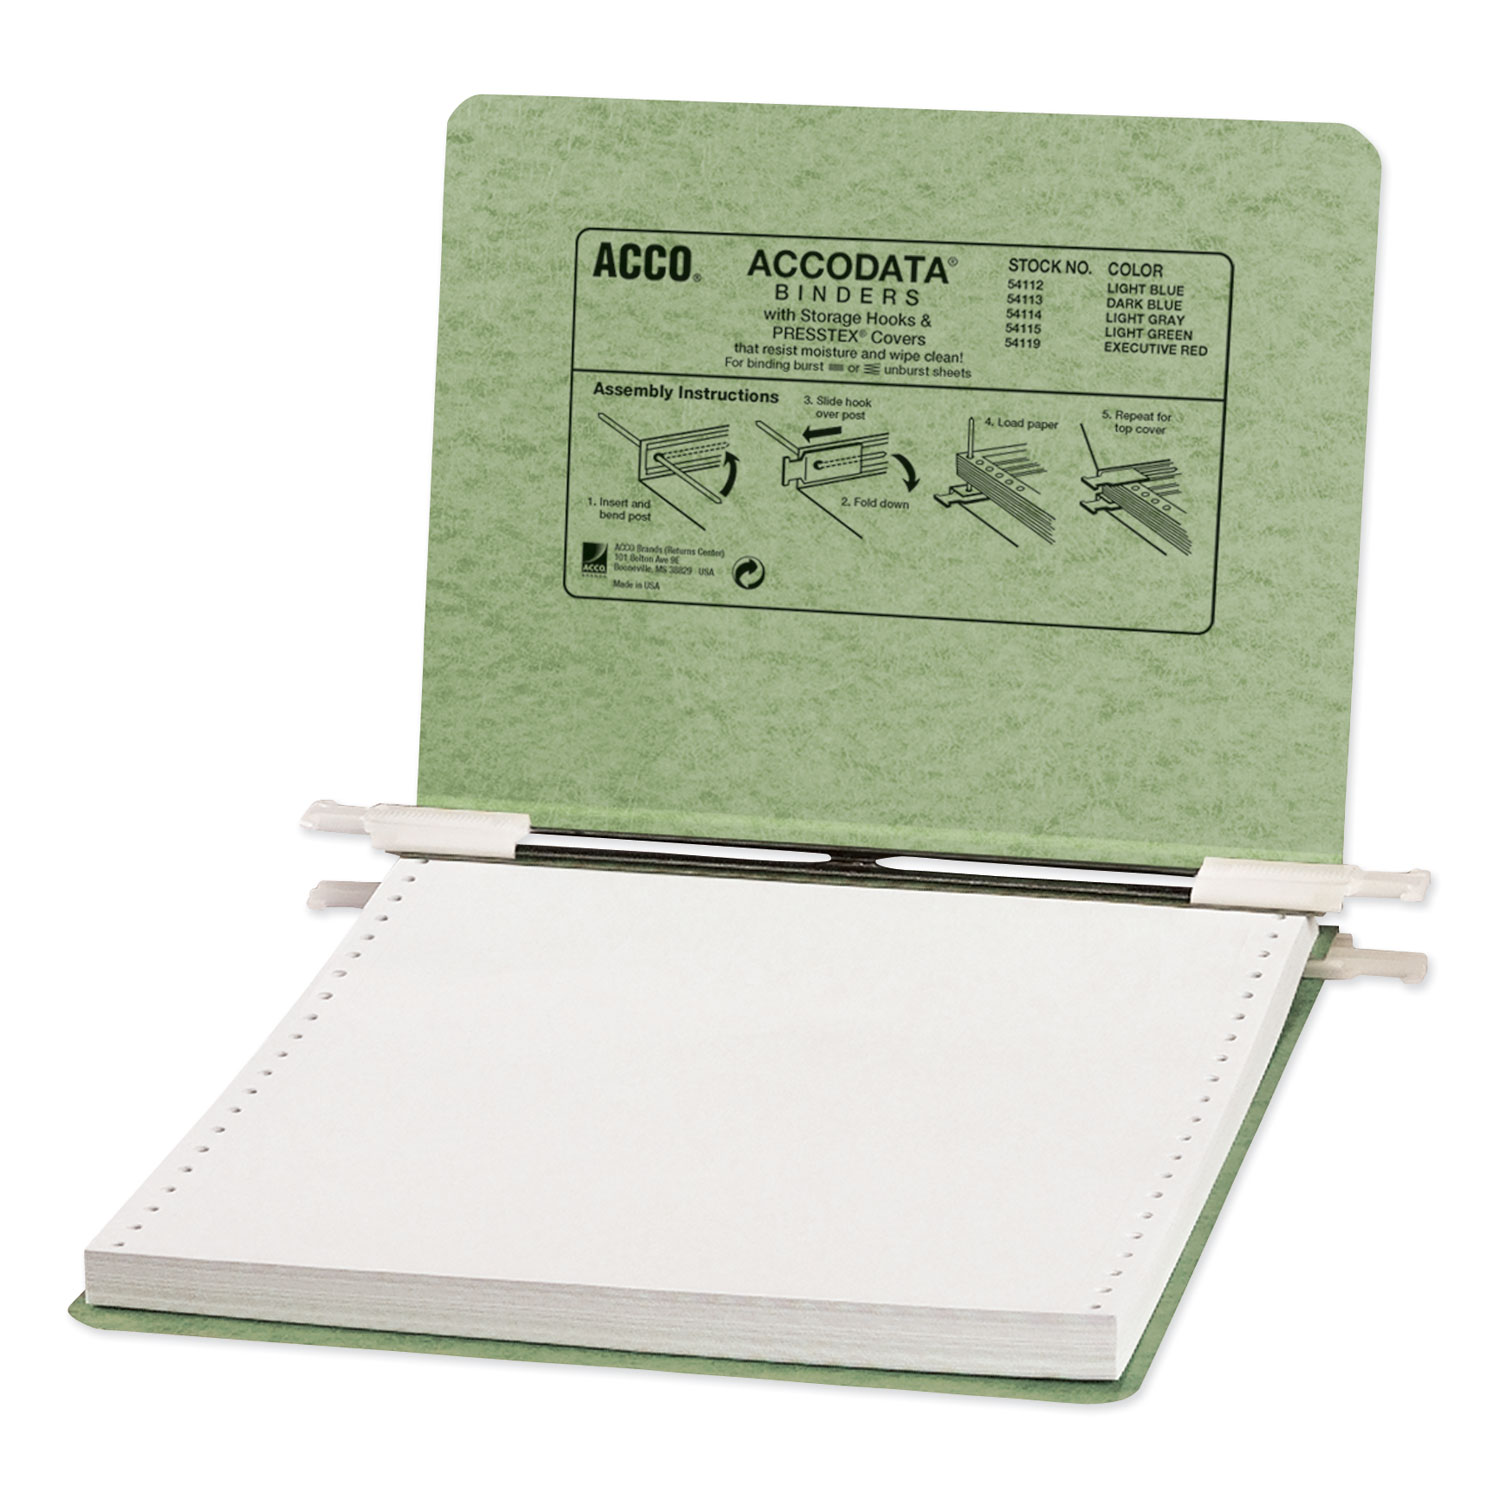  ACCO A7054115A PRESSTEX Covers with Storage Hooks, 2 Posts, 6 Capacity, 9.5 x 11, Light Green (ACC54115) 